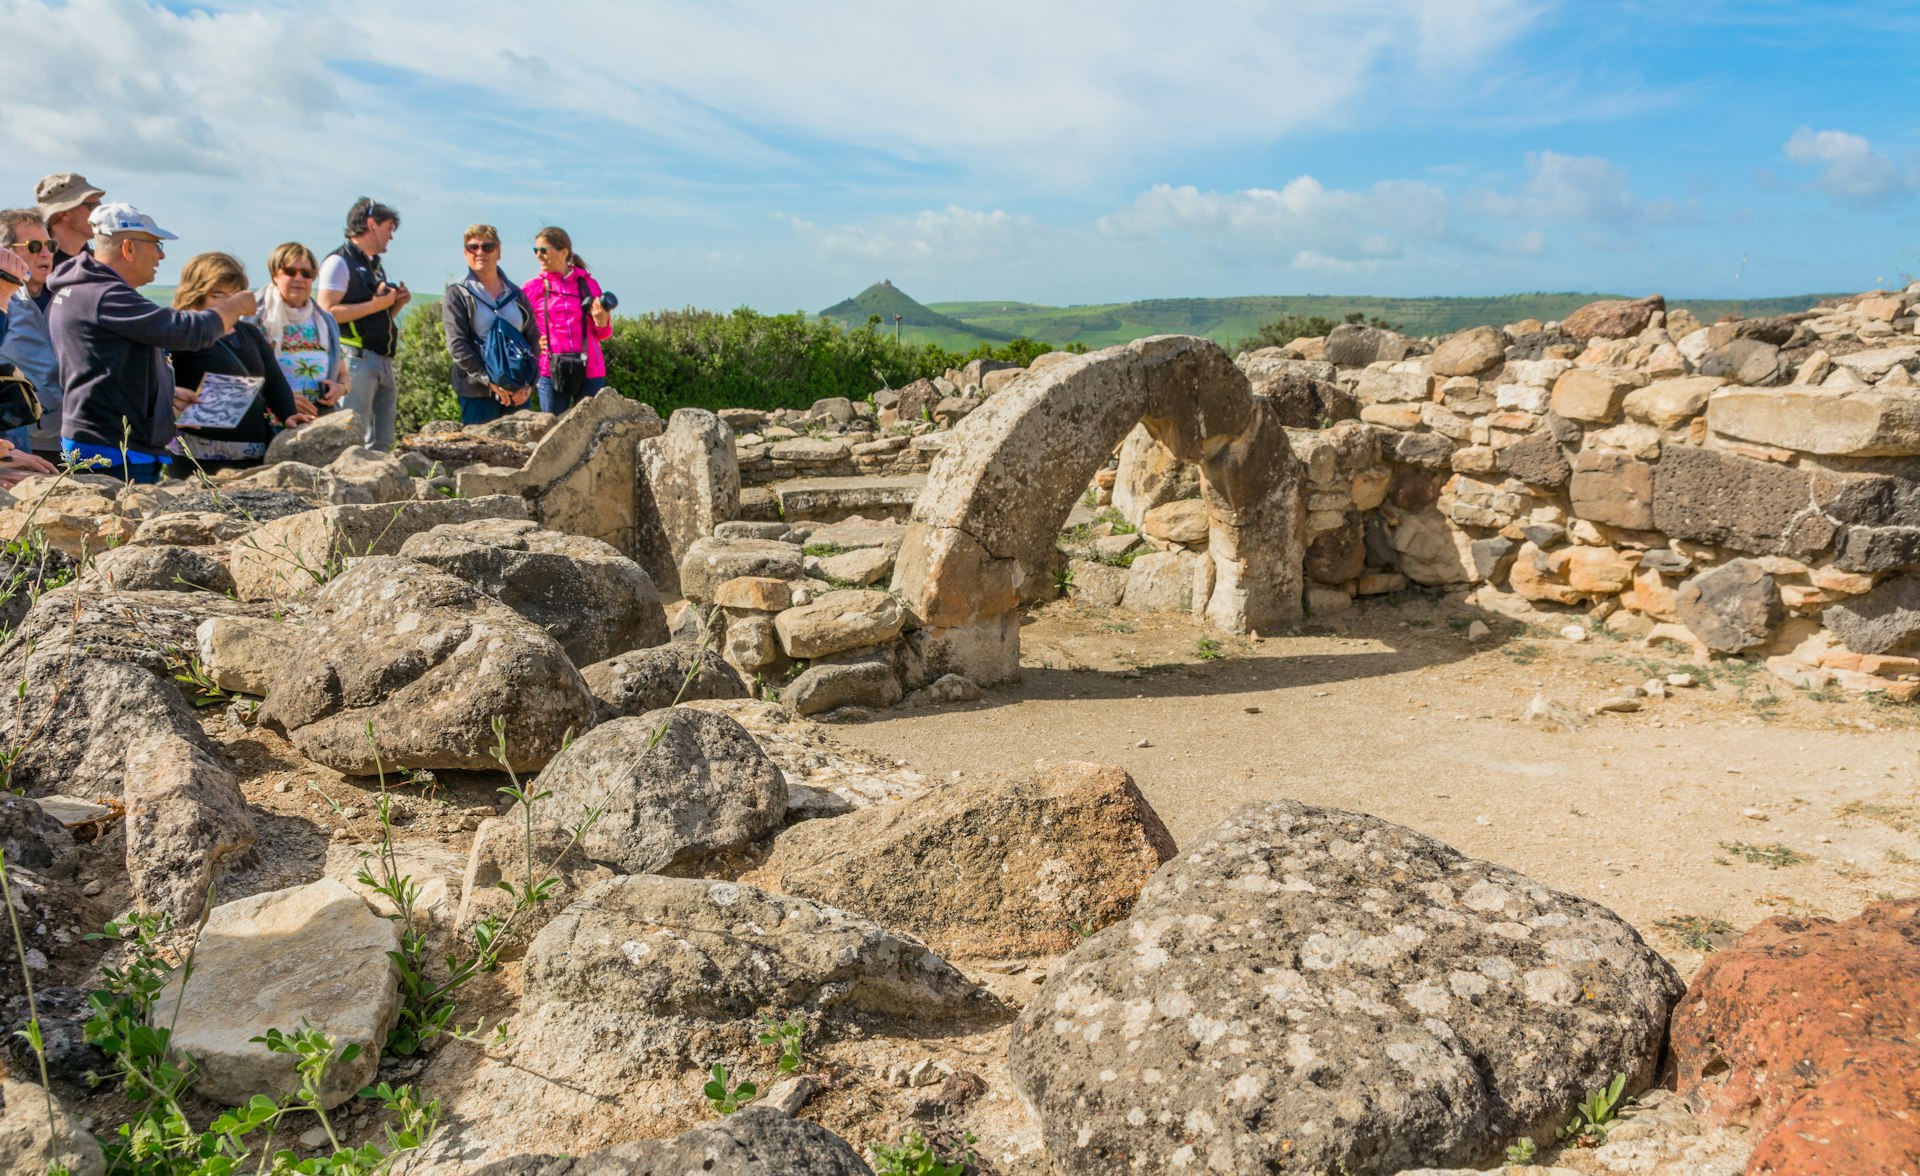 A guide and visitors at Nuraghe Su Nuraxi archaeological site in Sardinia